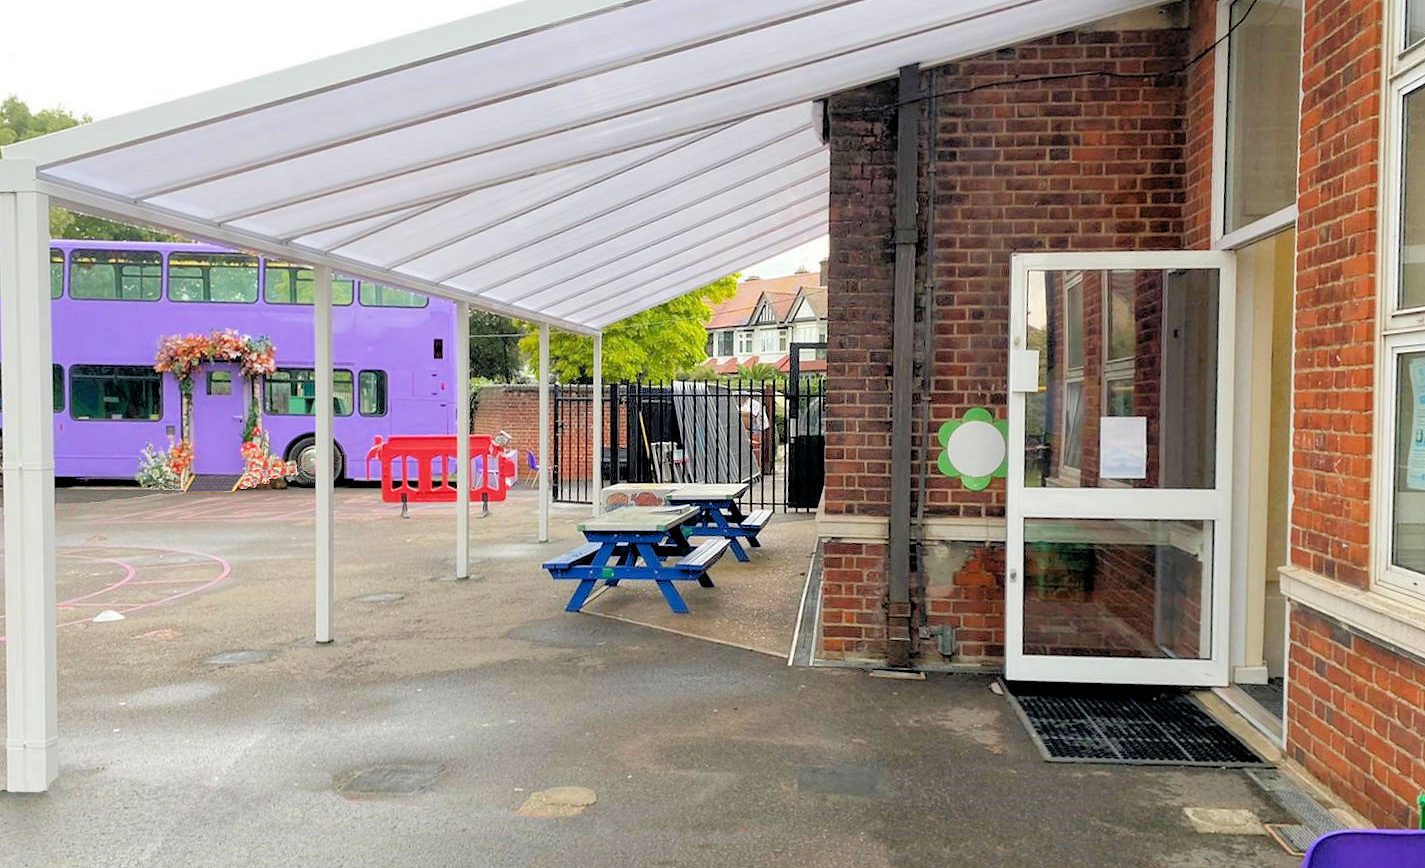 Parkside Primary School – Wall Mounted Canopy